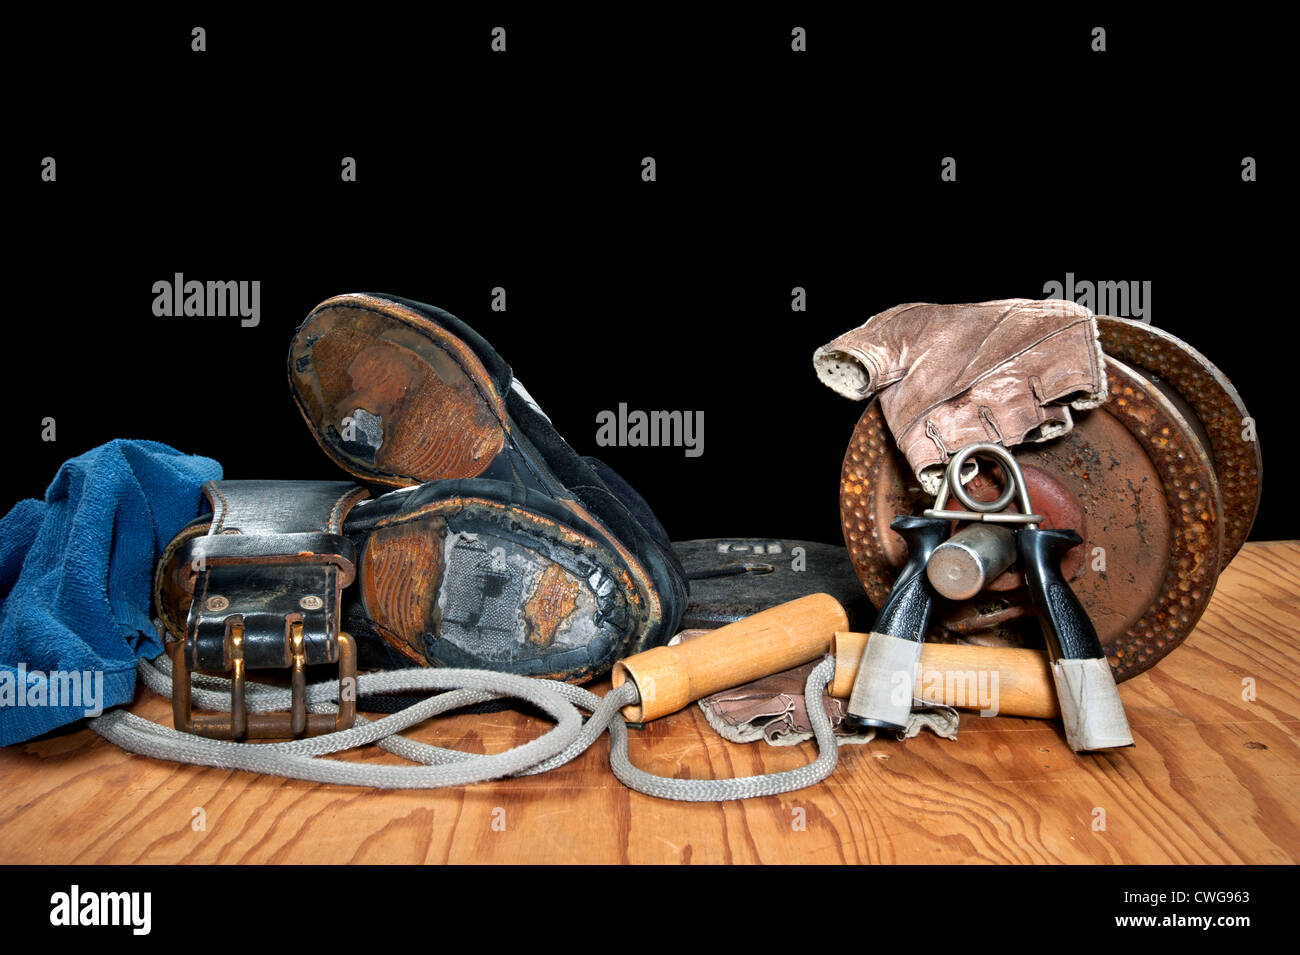 A collection of old exercise equipment including hand grips, dumbell, jump rope and old, torn weightlifting shoes. Stock Photo